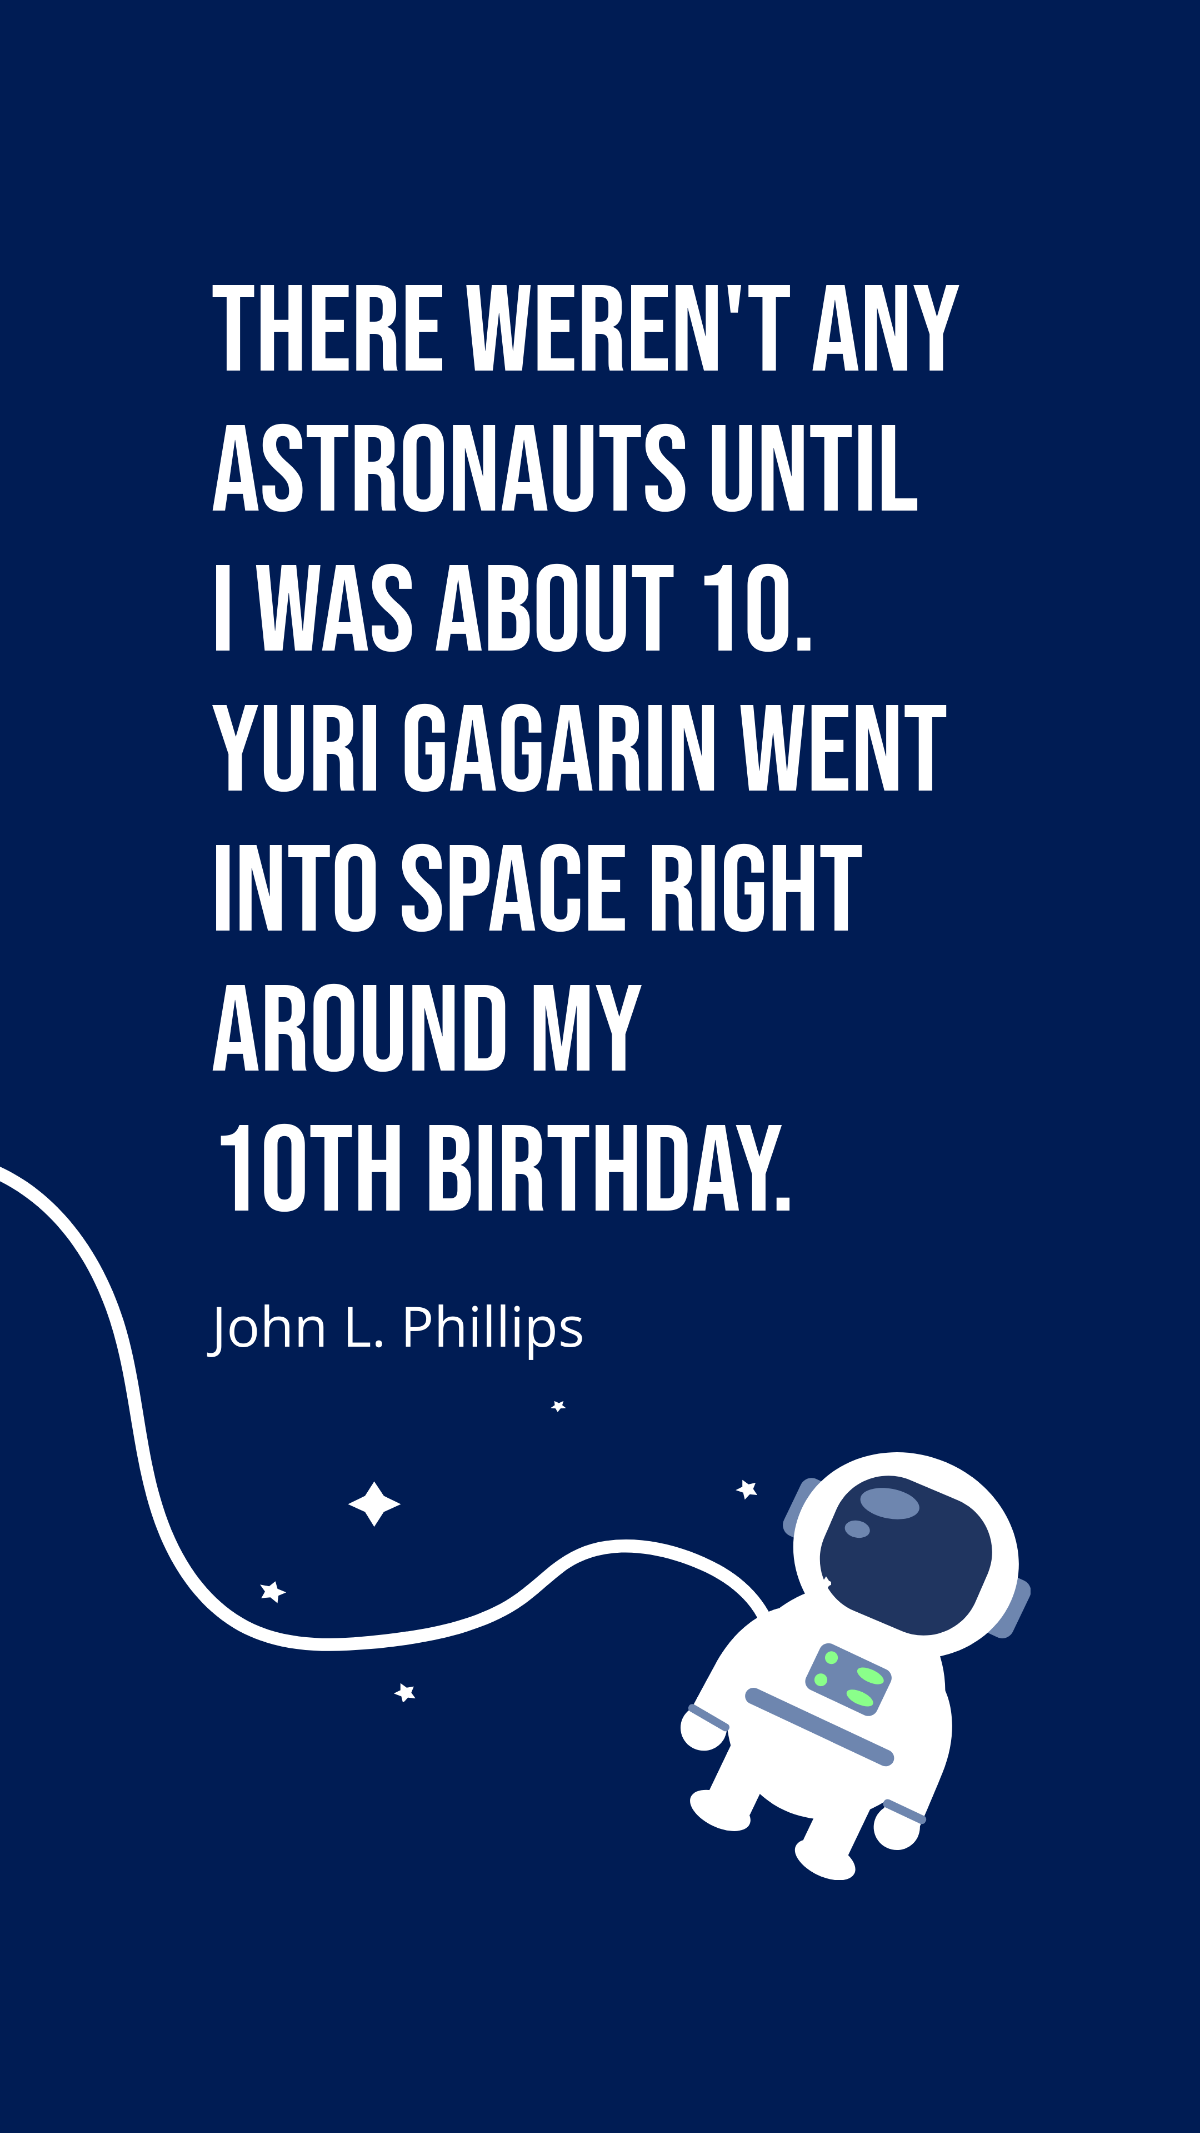 John L. Phillips - There weren't any astronauts until I was about 10. Yuri Gagarin went into space right around my 10th birthday. Template